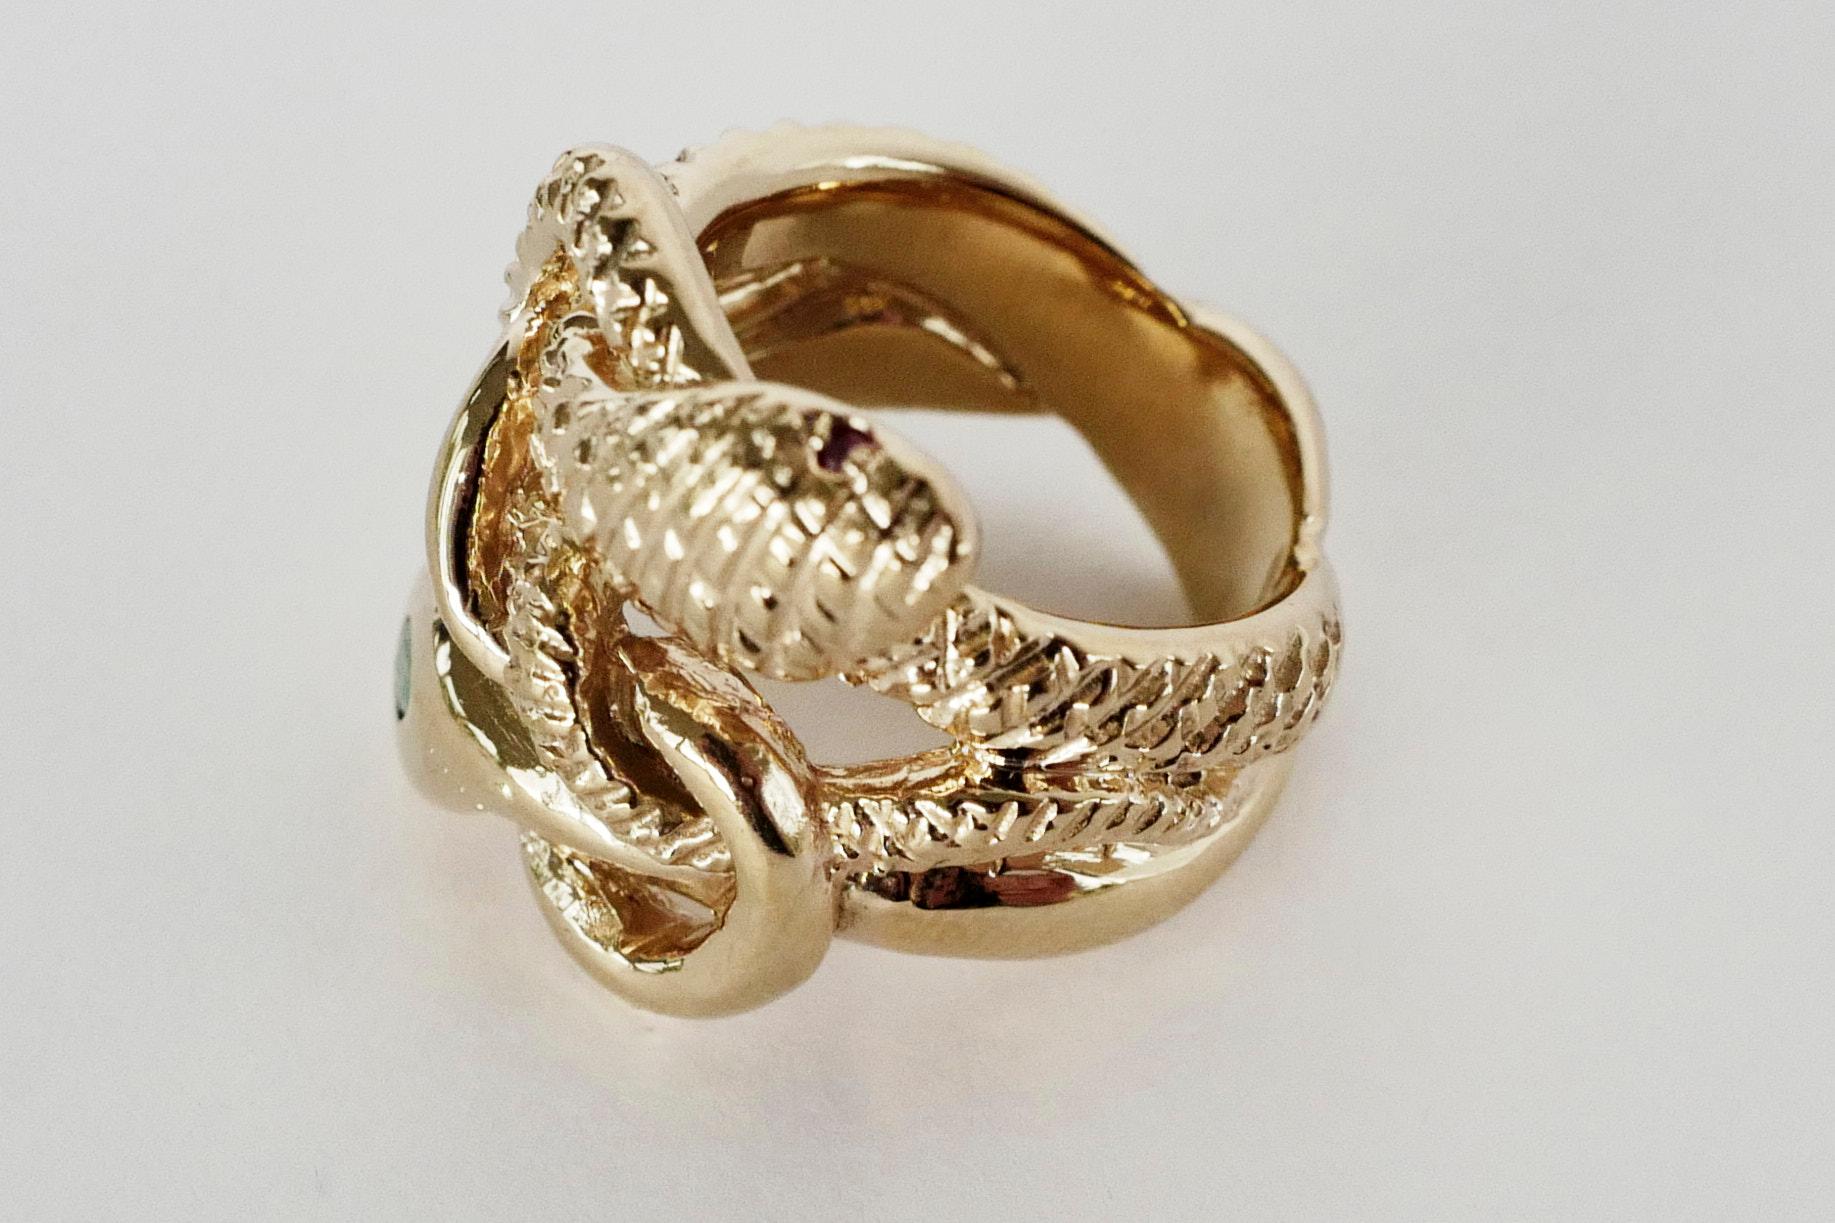 Emerald White Diamond Snake Ring Ruby Eyes Bronze Victorian Style J Dauphin For Sale 3